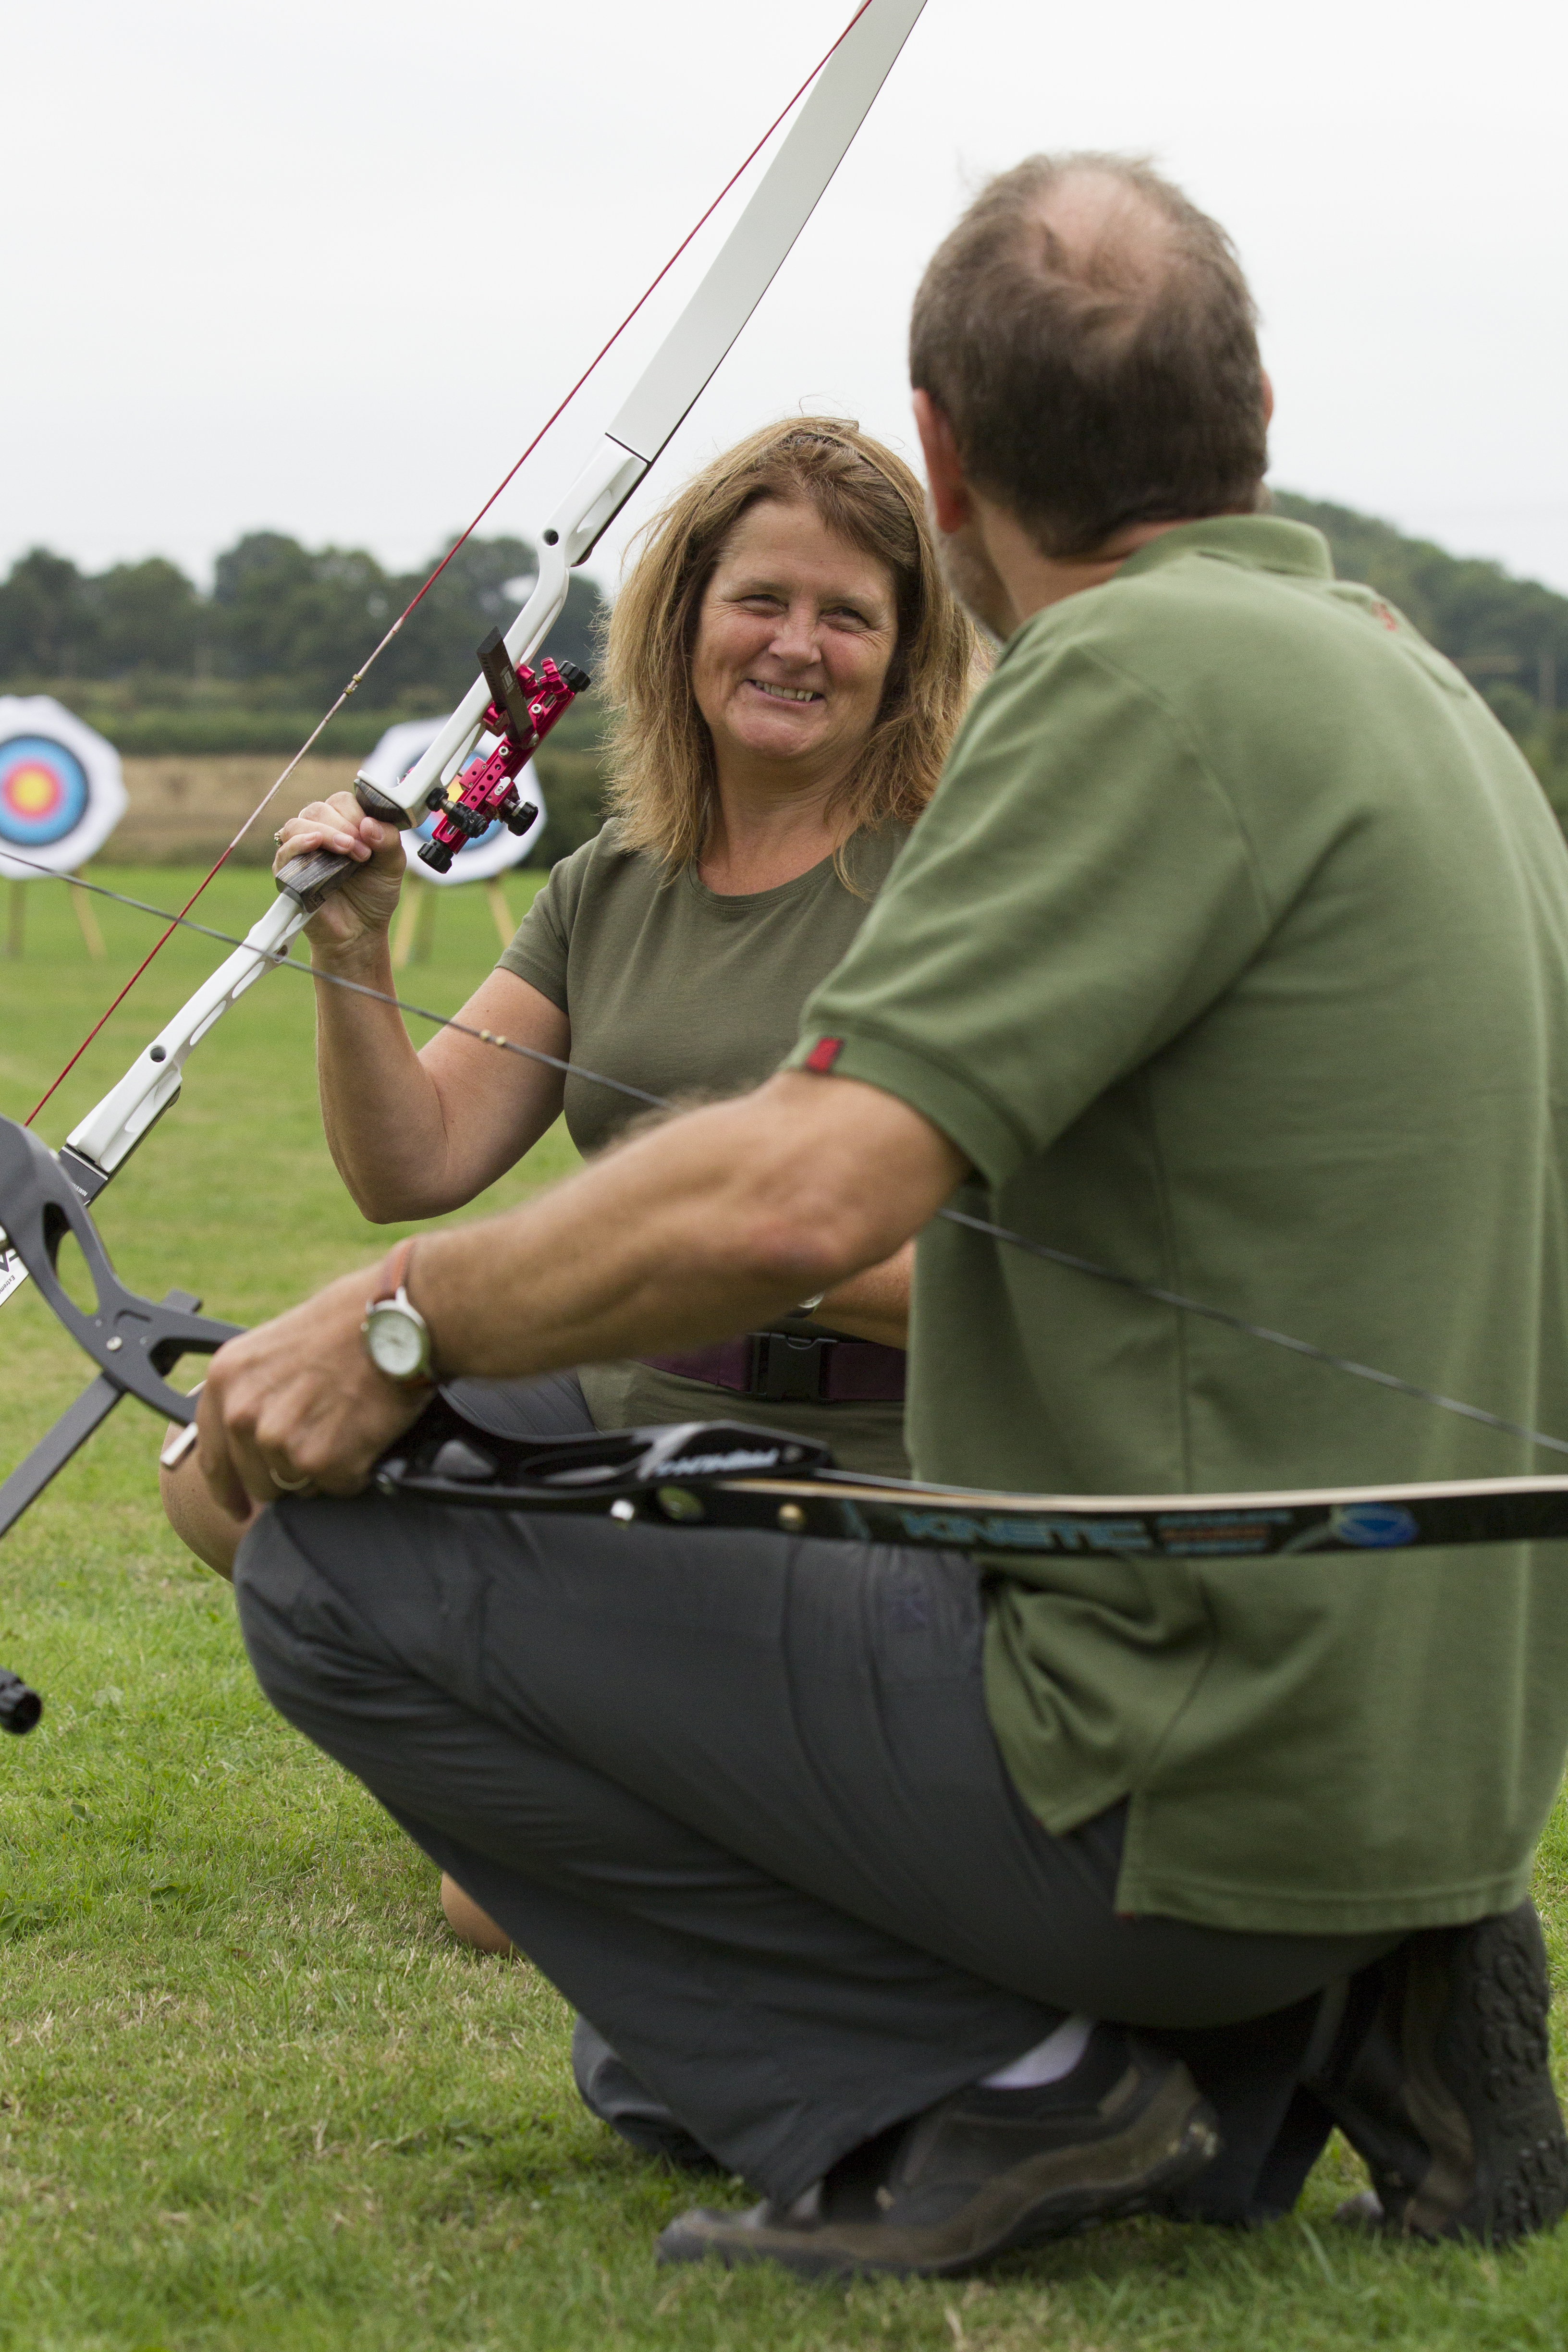 People talking holding archery equipment